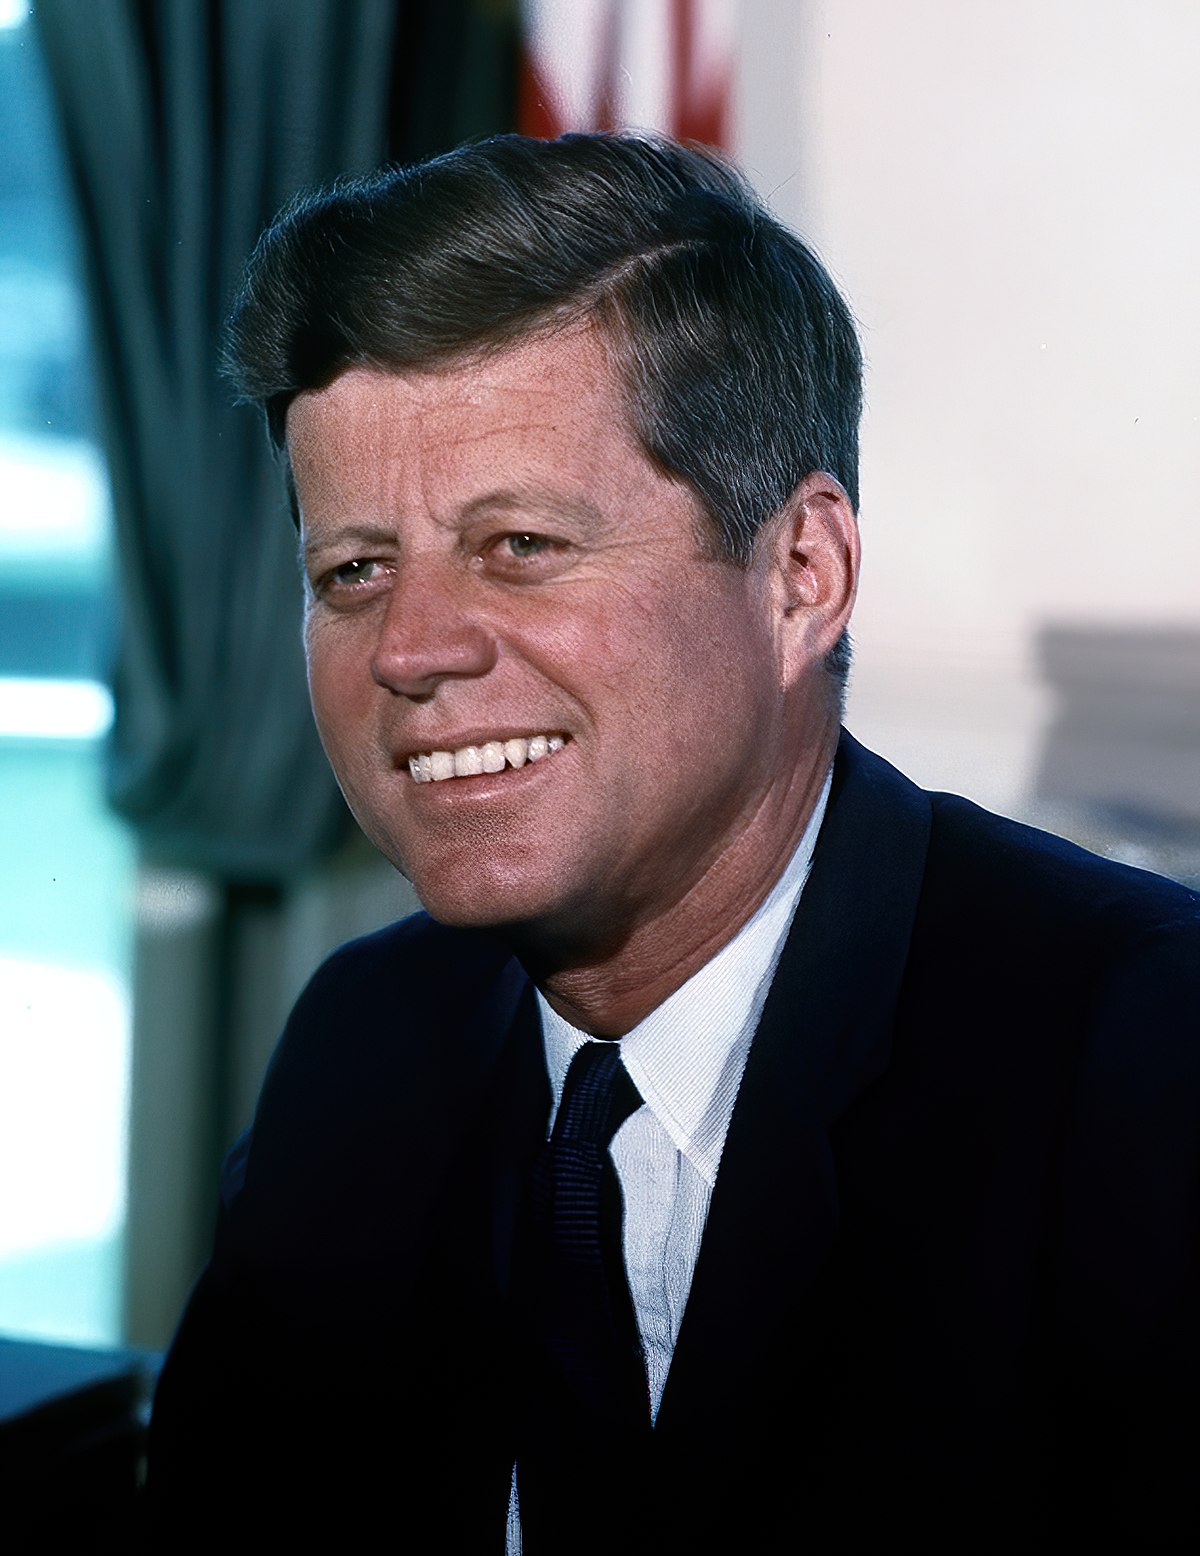 spicy historical facts - john f kennedy